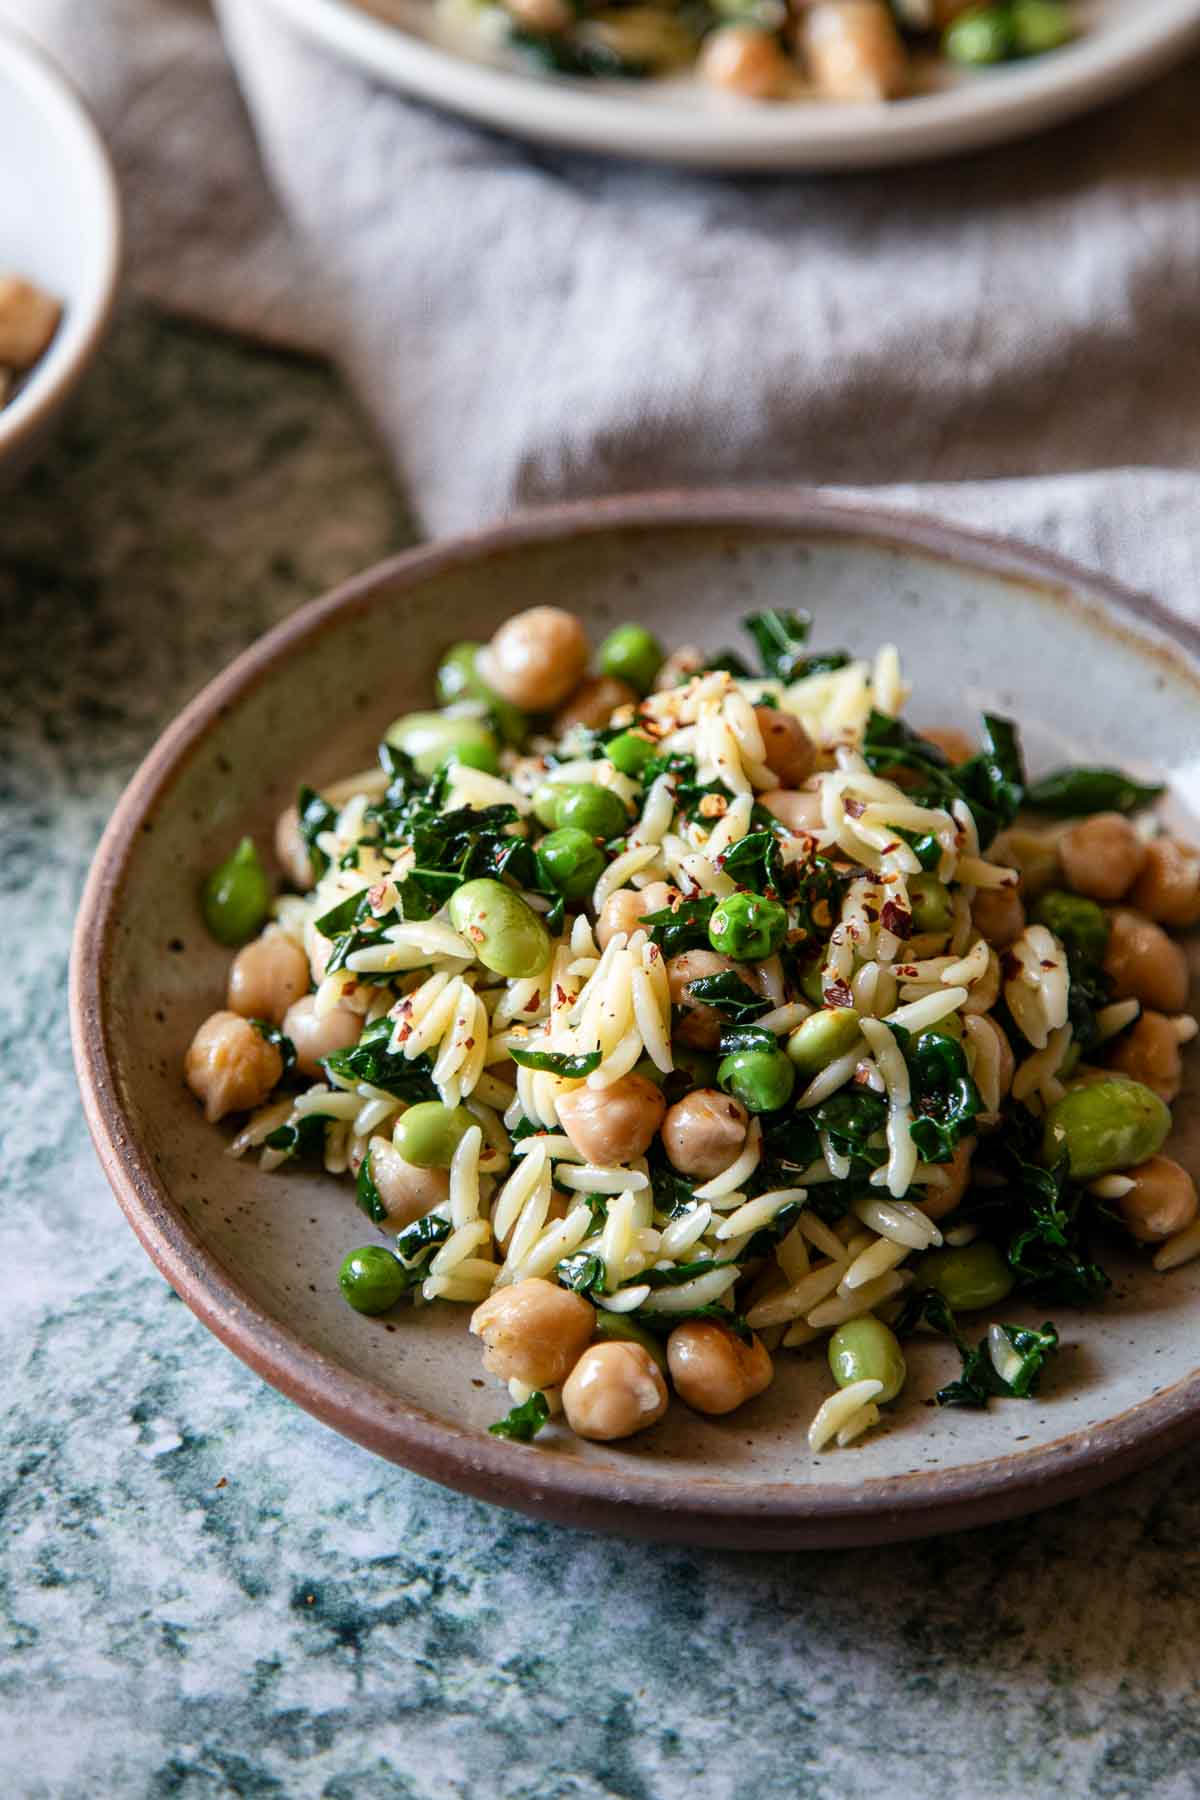 Orzo, pasta, spinach, and garbanzo beans on light pink plate - close up photo